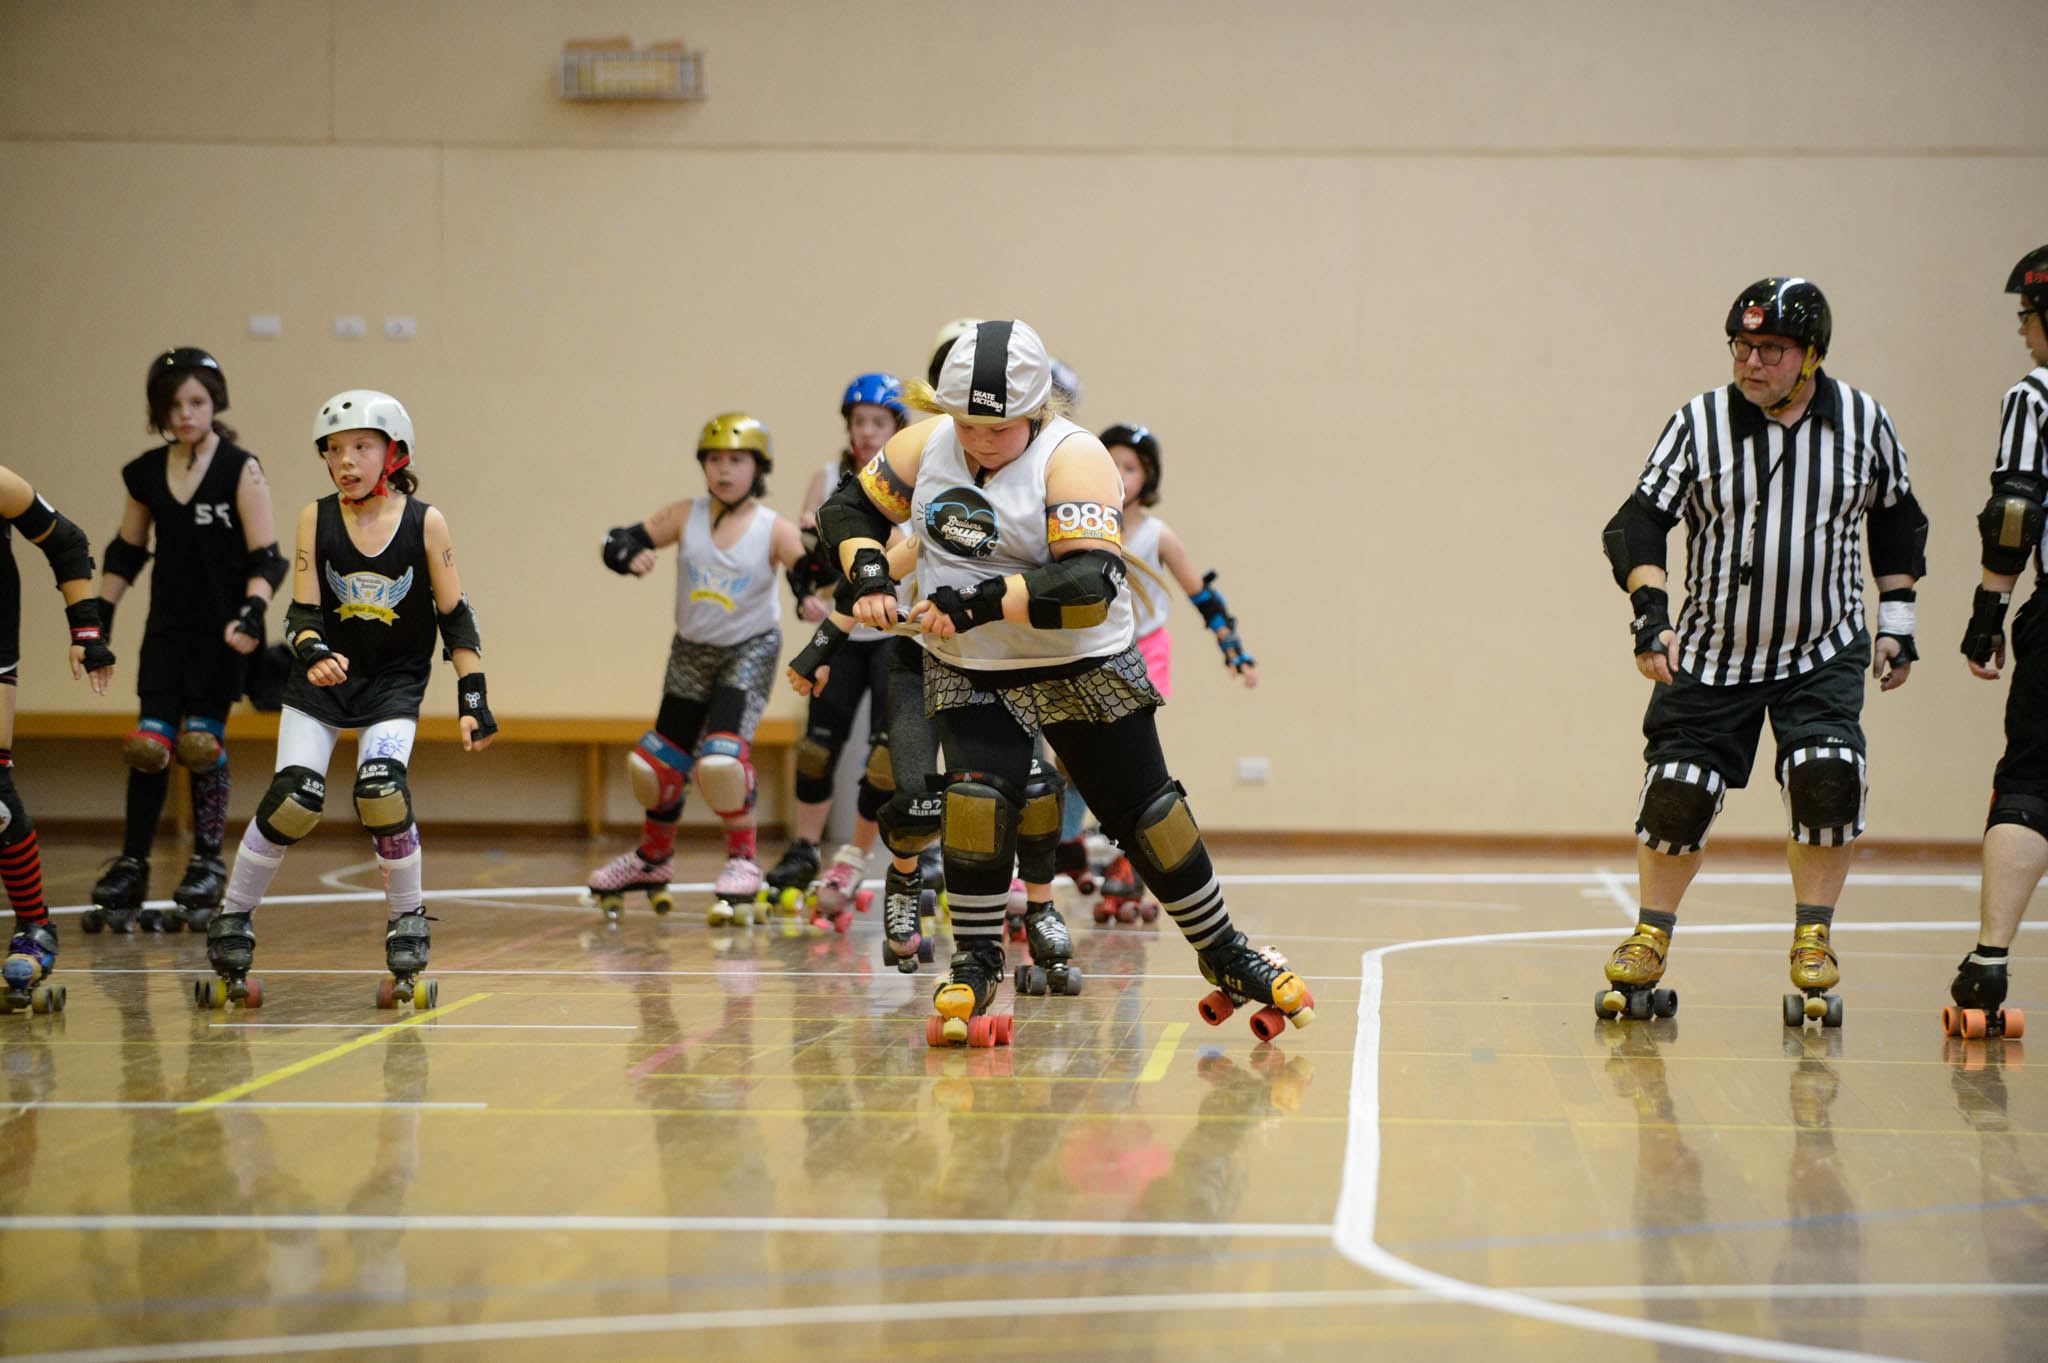 Capital Stampede - Outback v City Slickers, Photographer: Brett Sargeant, D-eye Photography